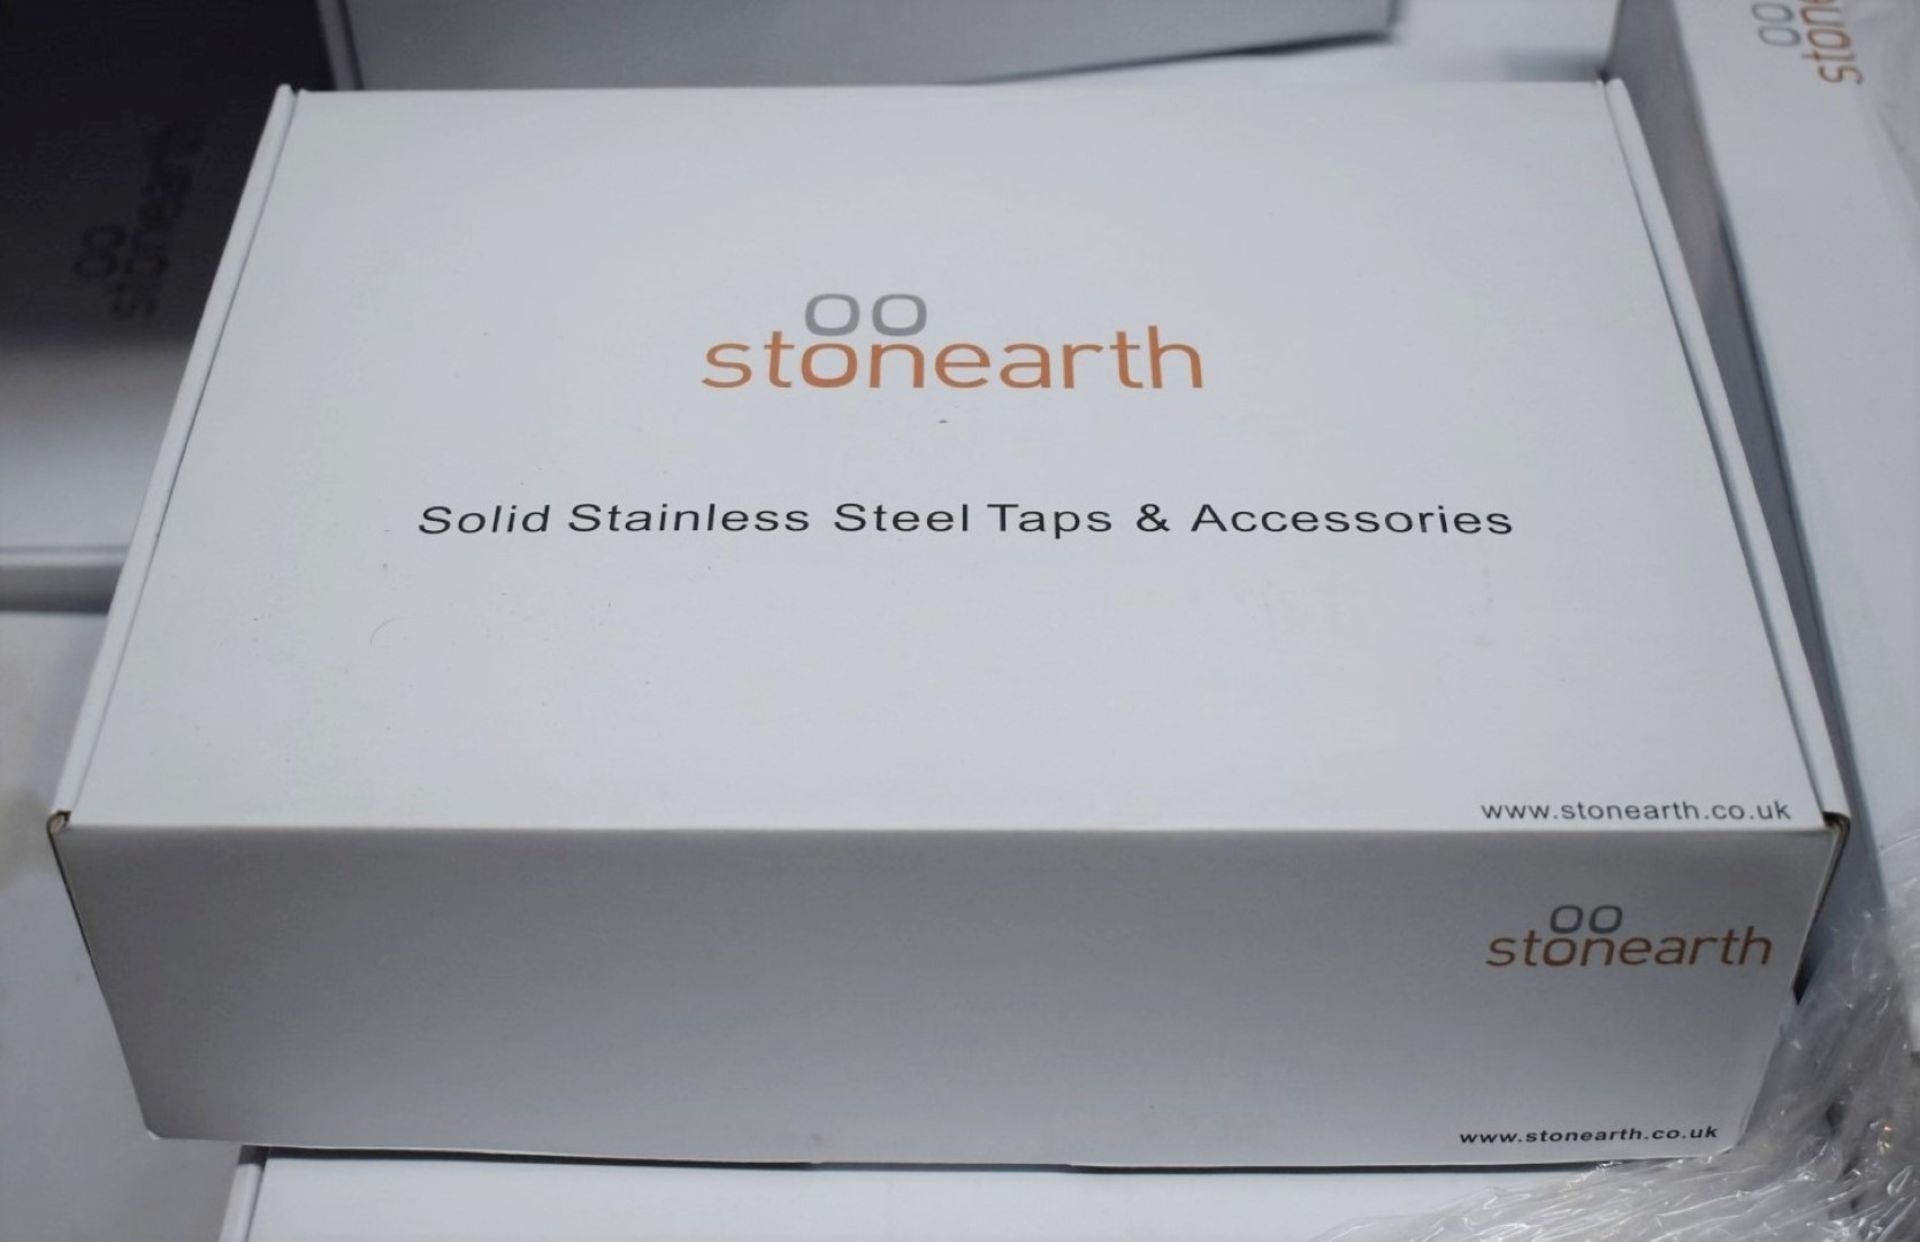 1 x Stonearth 'Metro' Stainless Steel Basin Mixer Tap - Brand New & Boxed - RRP £245 - Ref: TP821 P6 - Image 8 of 14